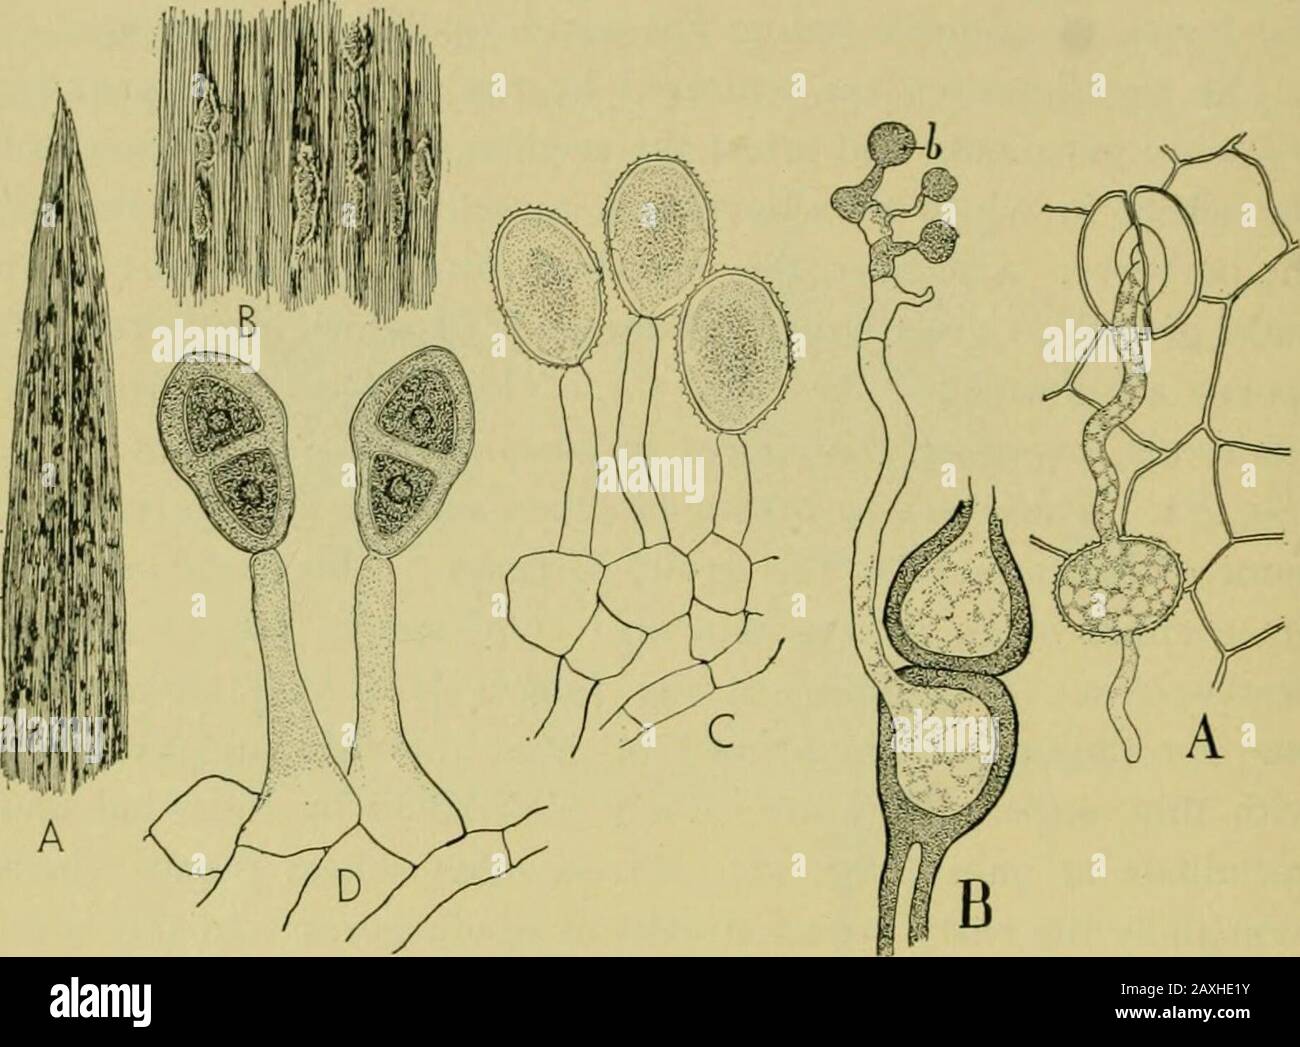 Nature and development of plants . me mycelium forms in the leavesof the wheat quite a different type of spore. They are formed inthe same manner as the uredospores but are provided with thickdark walls and from one to several spores are developed at theend of the hyphae (Fig. 160, D). Consequently, when the epider-mis is ruptured, these spores form rusty black blotches on theleaves. This third stage is known as the telial, since it ends theseasons growth. These spores, called teleutospores, are restingspores and tide the fungus over the winter. They germinatein the spring quite independent of Stock Photo